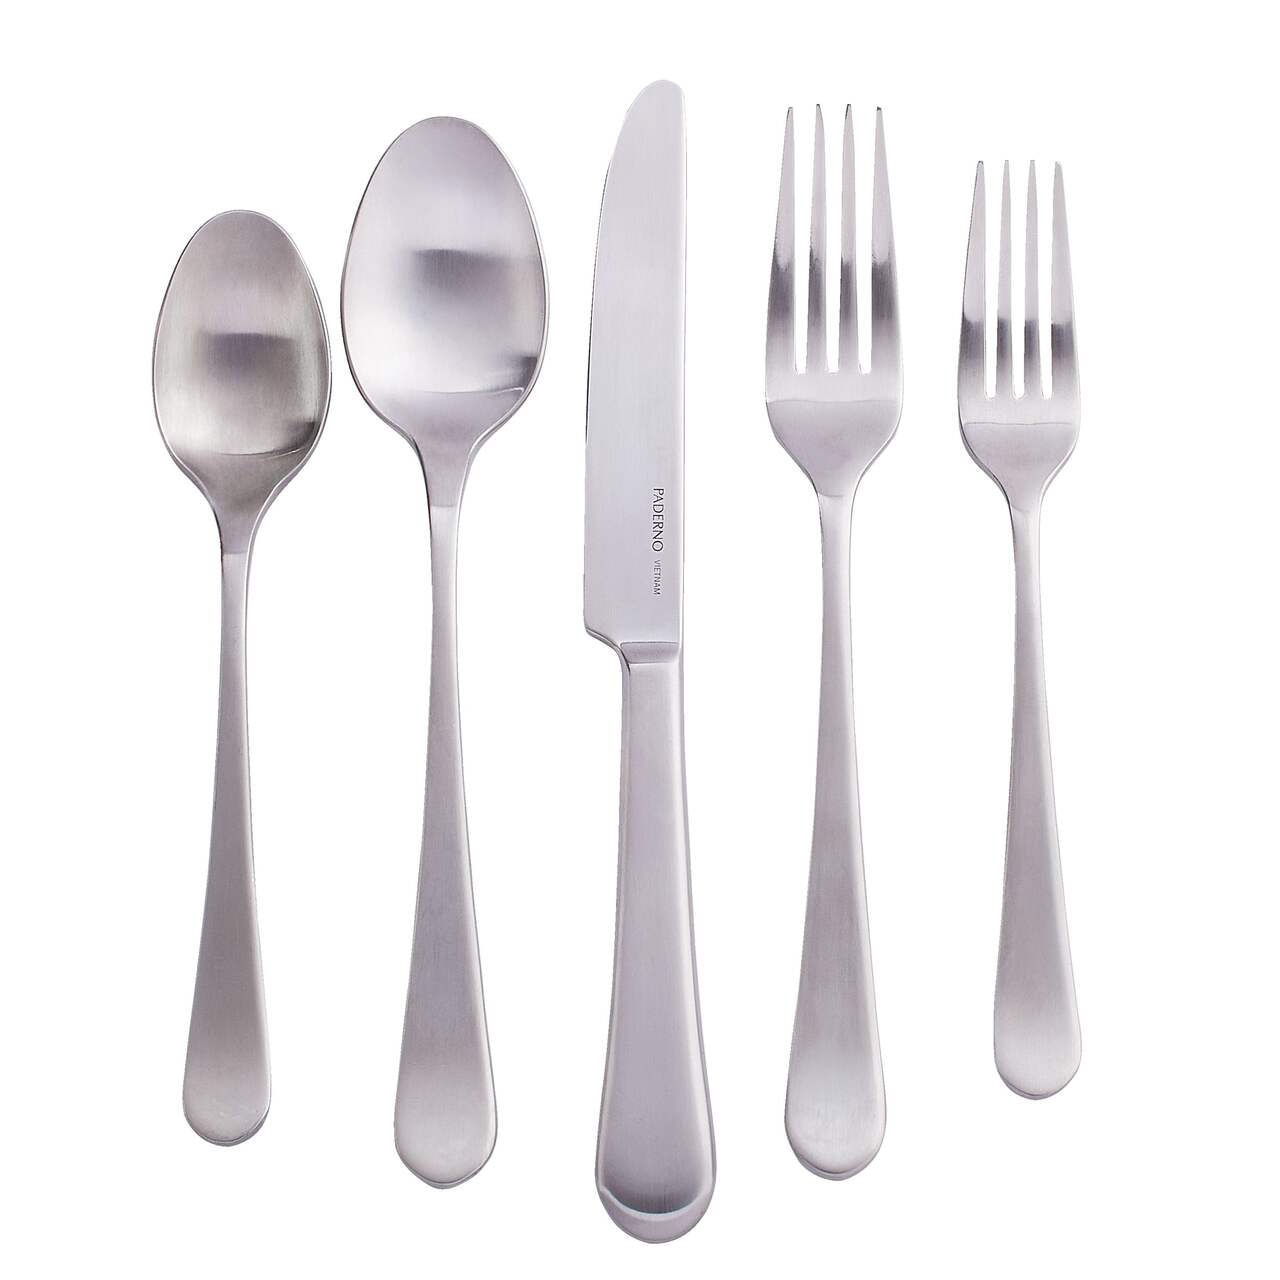 https://media-www.canadiantire.ca/product/living/kitchen/dining-and-entertaining/1423403/paderno-richmond-20-piece-flatware-set-satin-ed6d9b2b-e457-4a99-8639-bad8f13152a5-jpgrendition.jpg?imdensity=1&imwidth=640&impolicy=mZoom